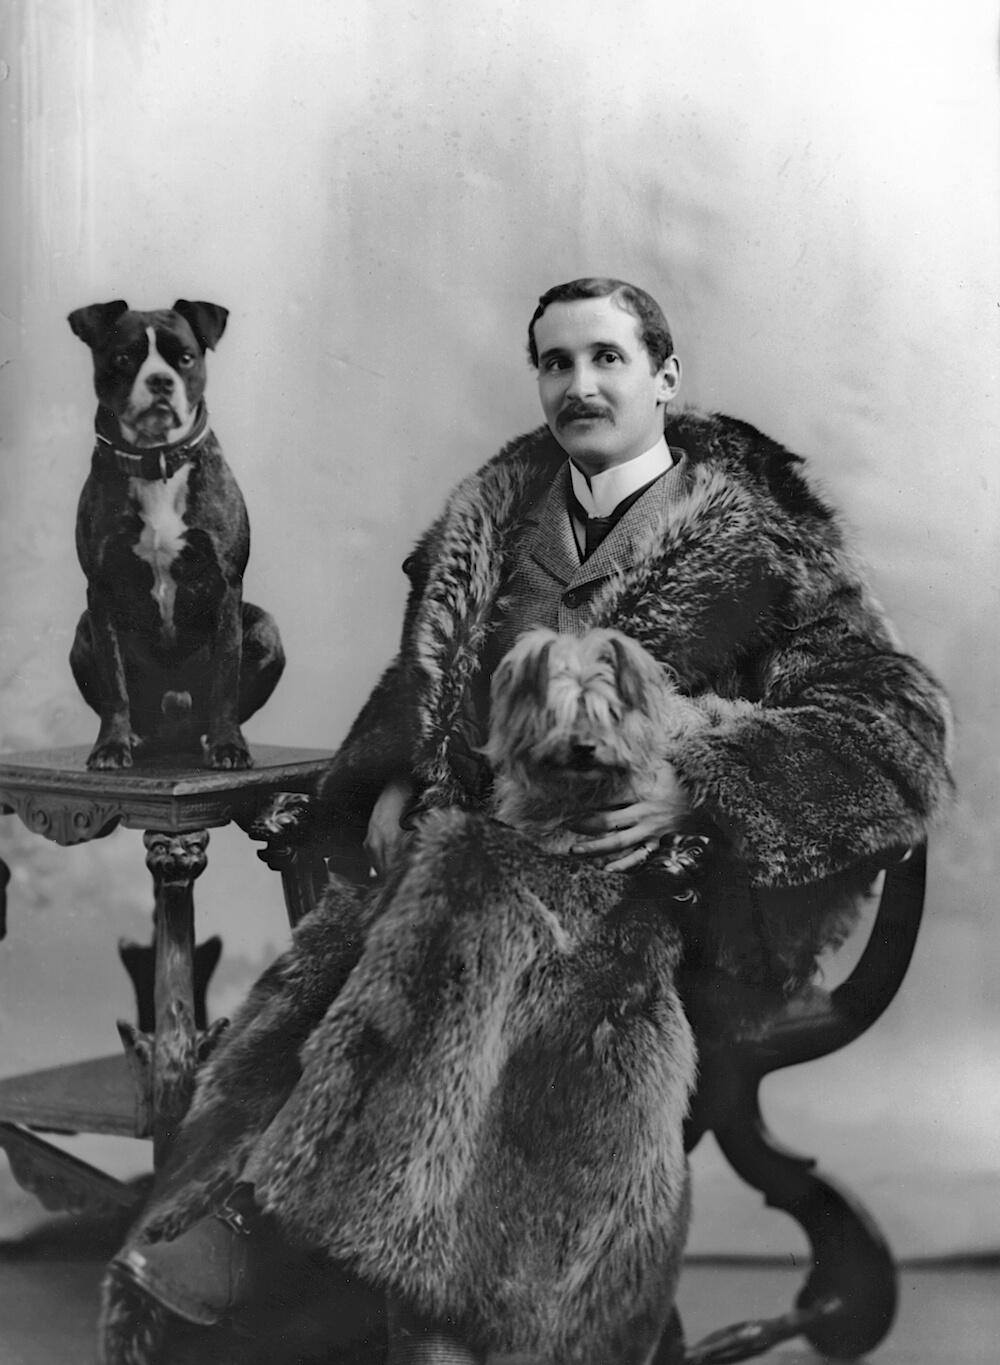 1898 - J. B. Patterson and dog, Montreal